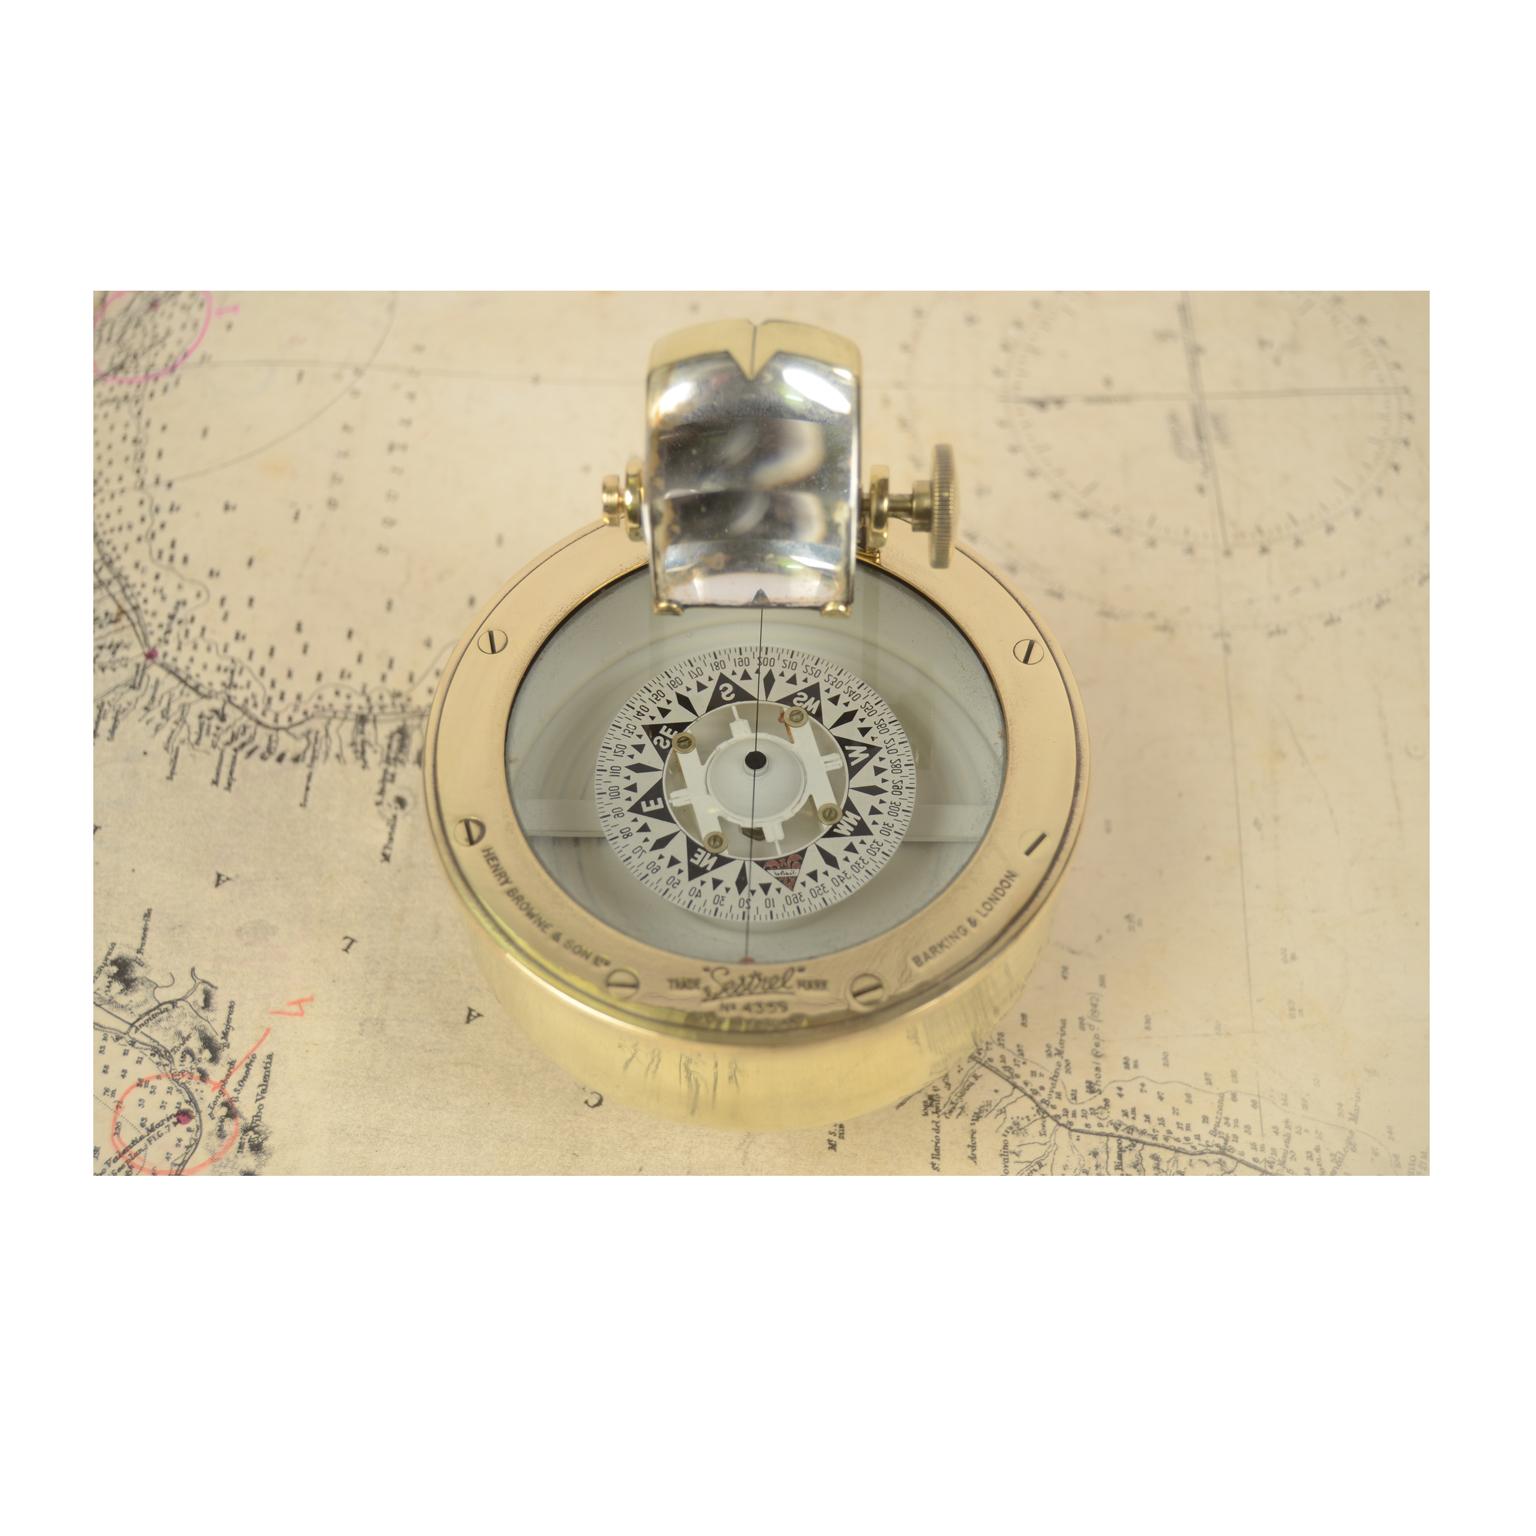 Magnetic Compass Signed Henry Browne & Son Ltd Sestrel, Early 20th Century 8